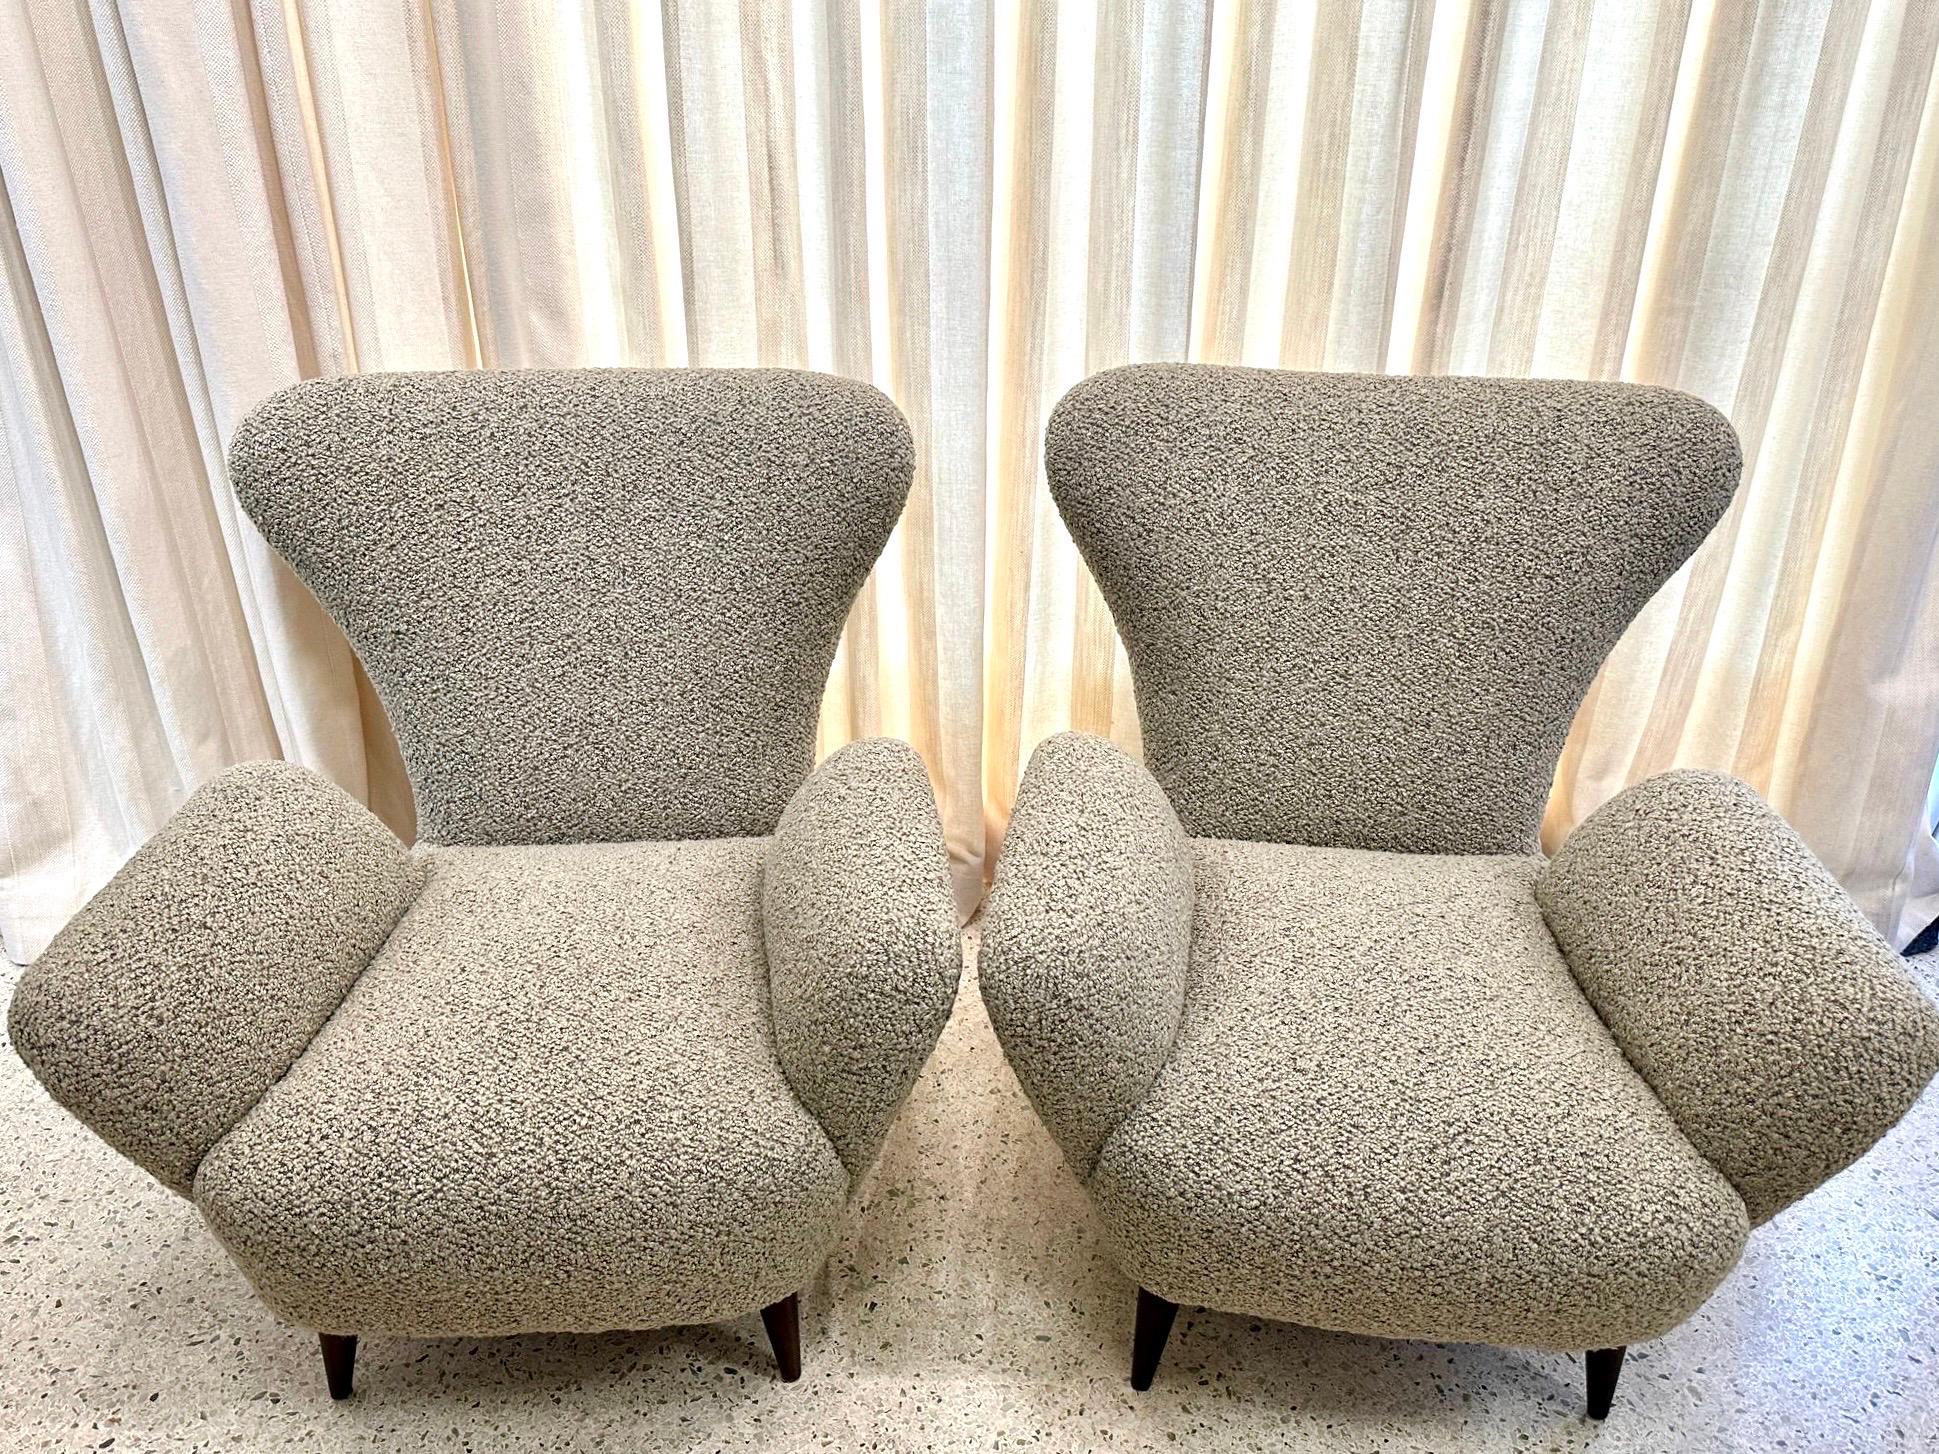 Emilio Sala and Giorgio Madini, armchairs with tapered wooden legs, Italy, 1940's - these low armchairs with wonderful soft curves and armrests.  Fully and expertly restored, reupholstered with new Bouclè.